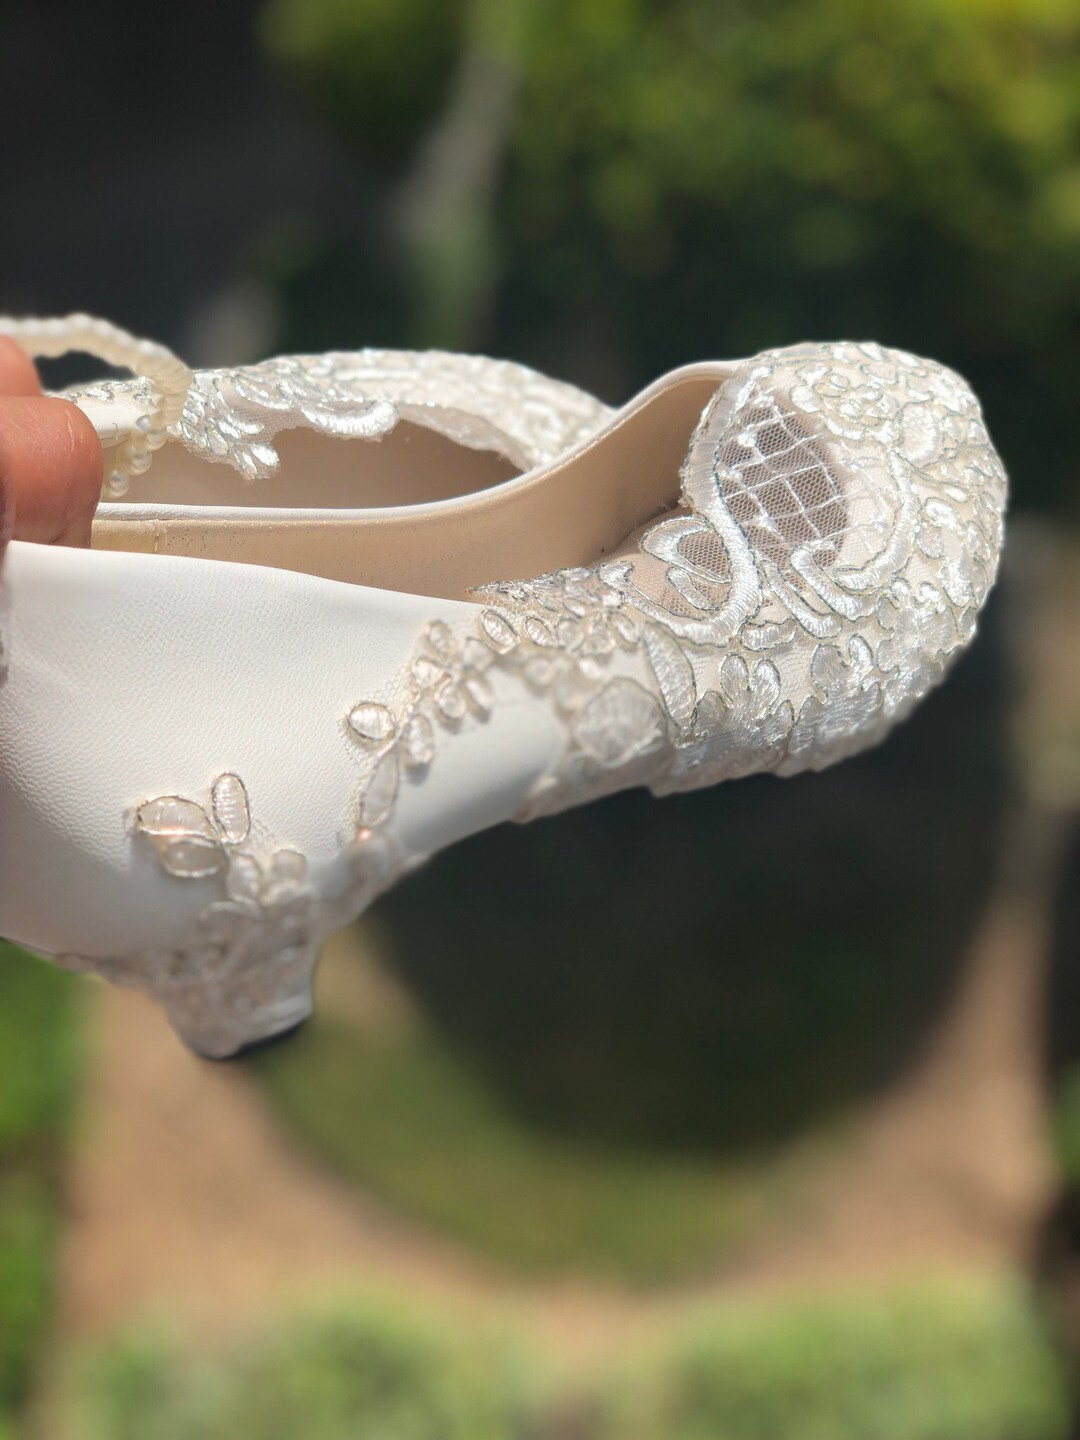 Buy White Wedding Bridal Heels, Lace Block Heel Sandals, Ivory Wedding Shoes,  Bridesmaid Shoe, Hen Do Engagement Party Online in India - Etsy